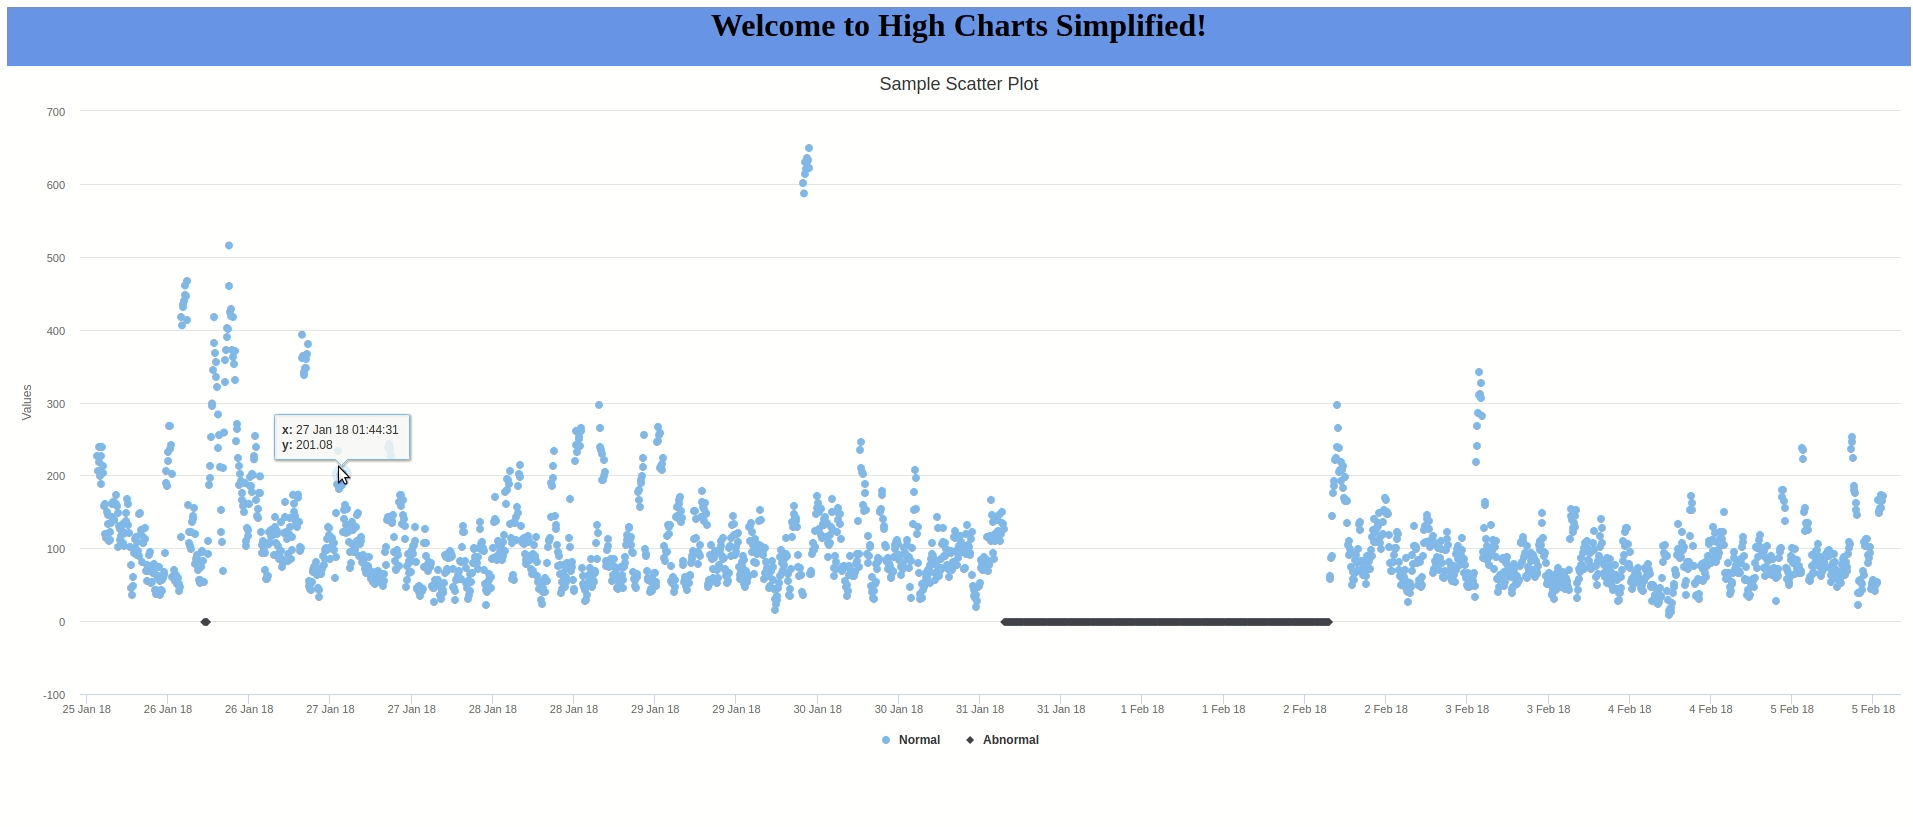 highcharts-simplified